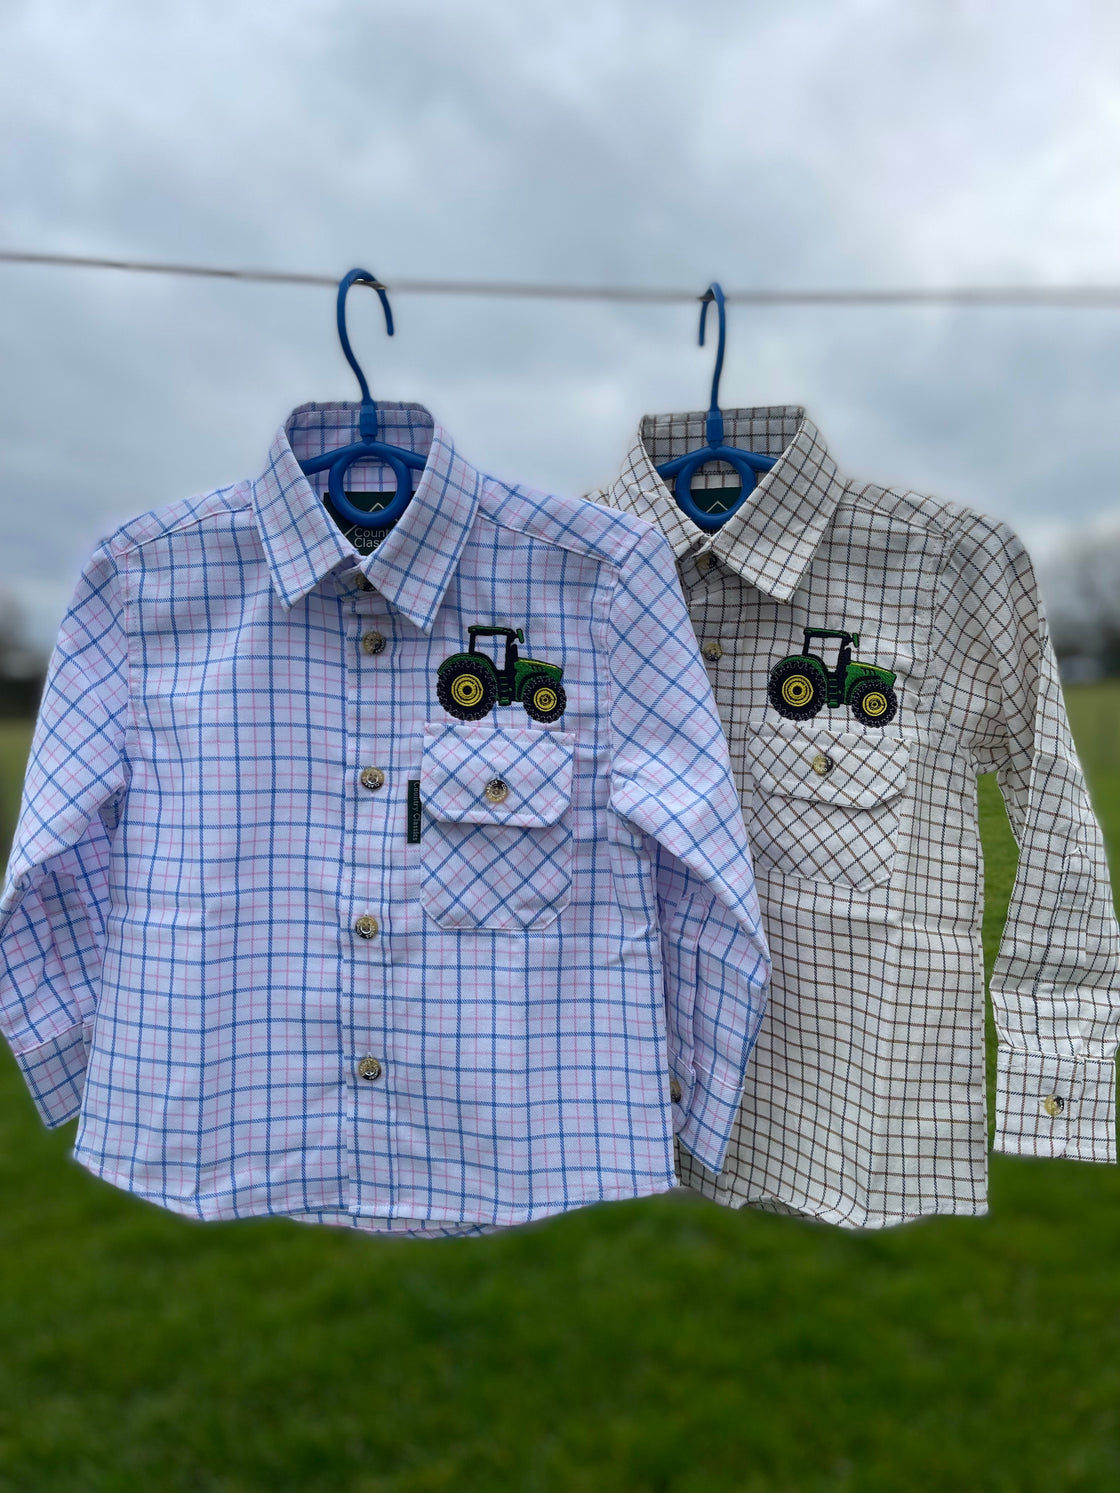 Shirt Embroidery With Tractor Or Animal Design